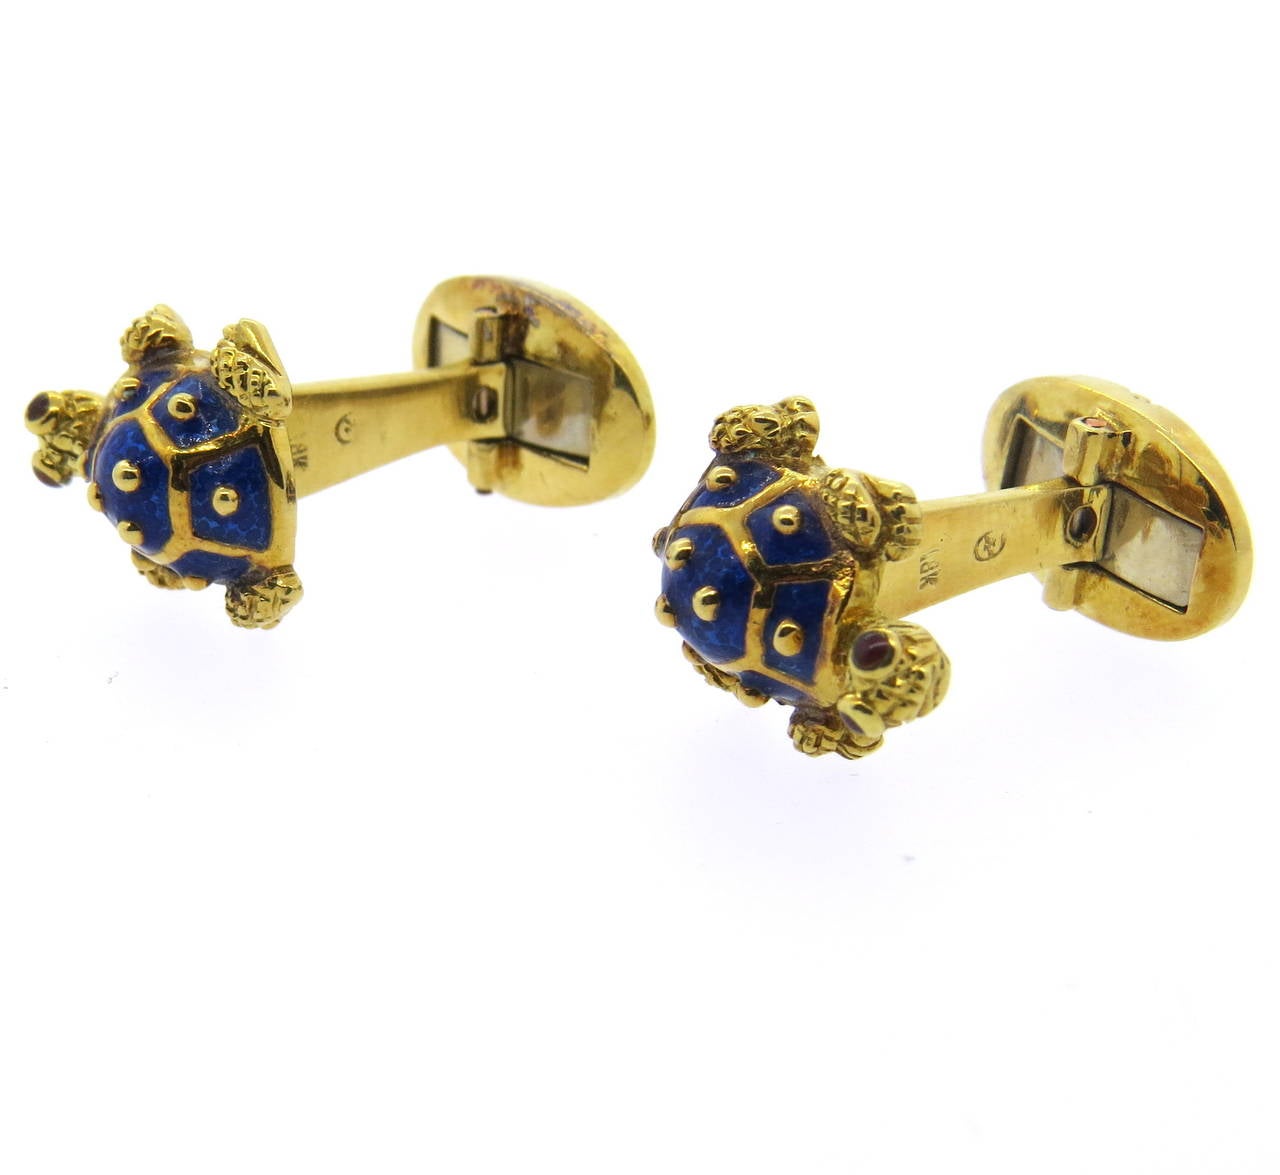 18k gold turtle cufflinks, decorated with blue enamel. Tops measure 15mm x 14mm. Weight - 15.8 grams